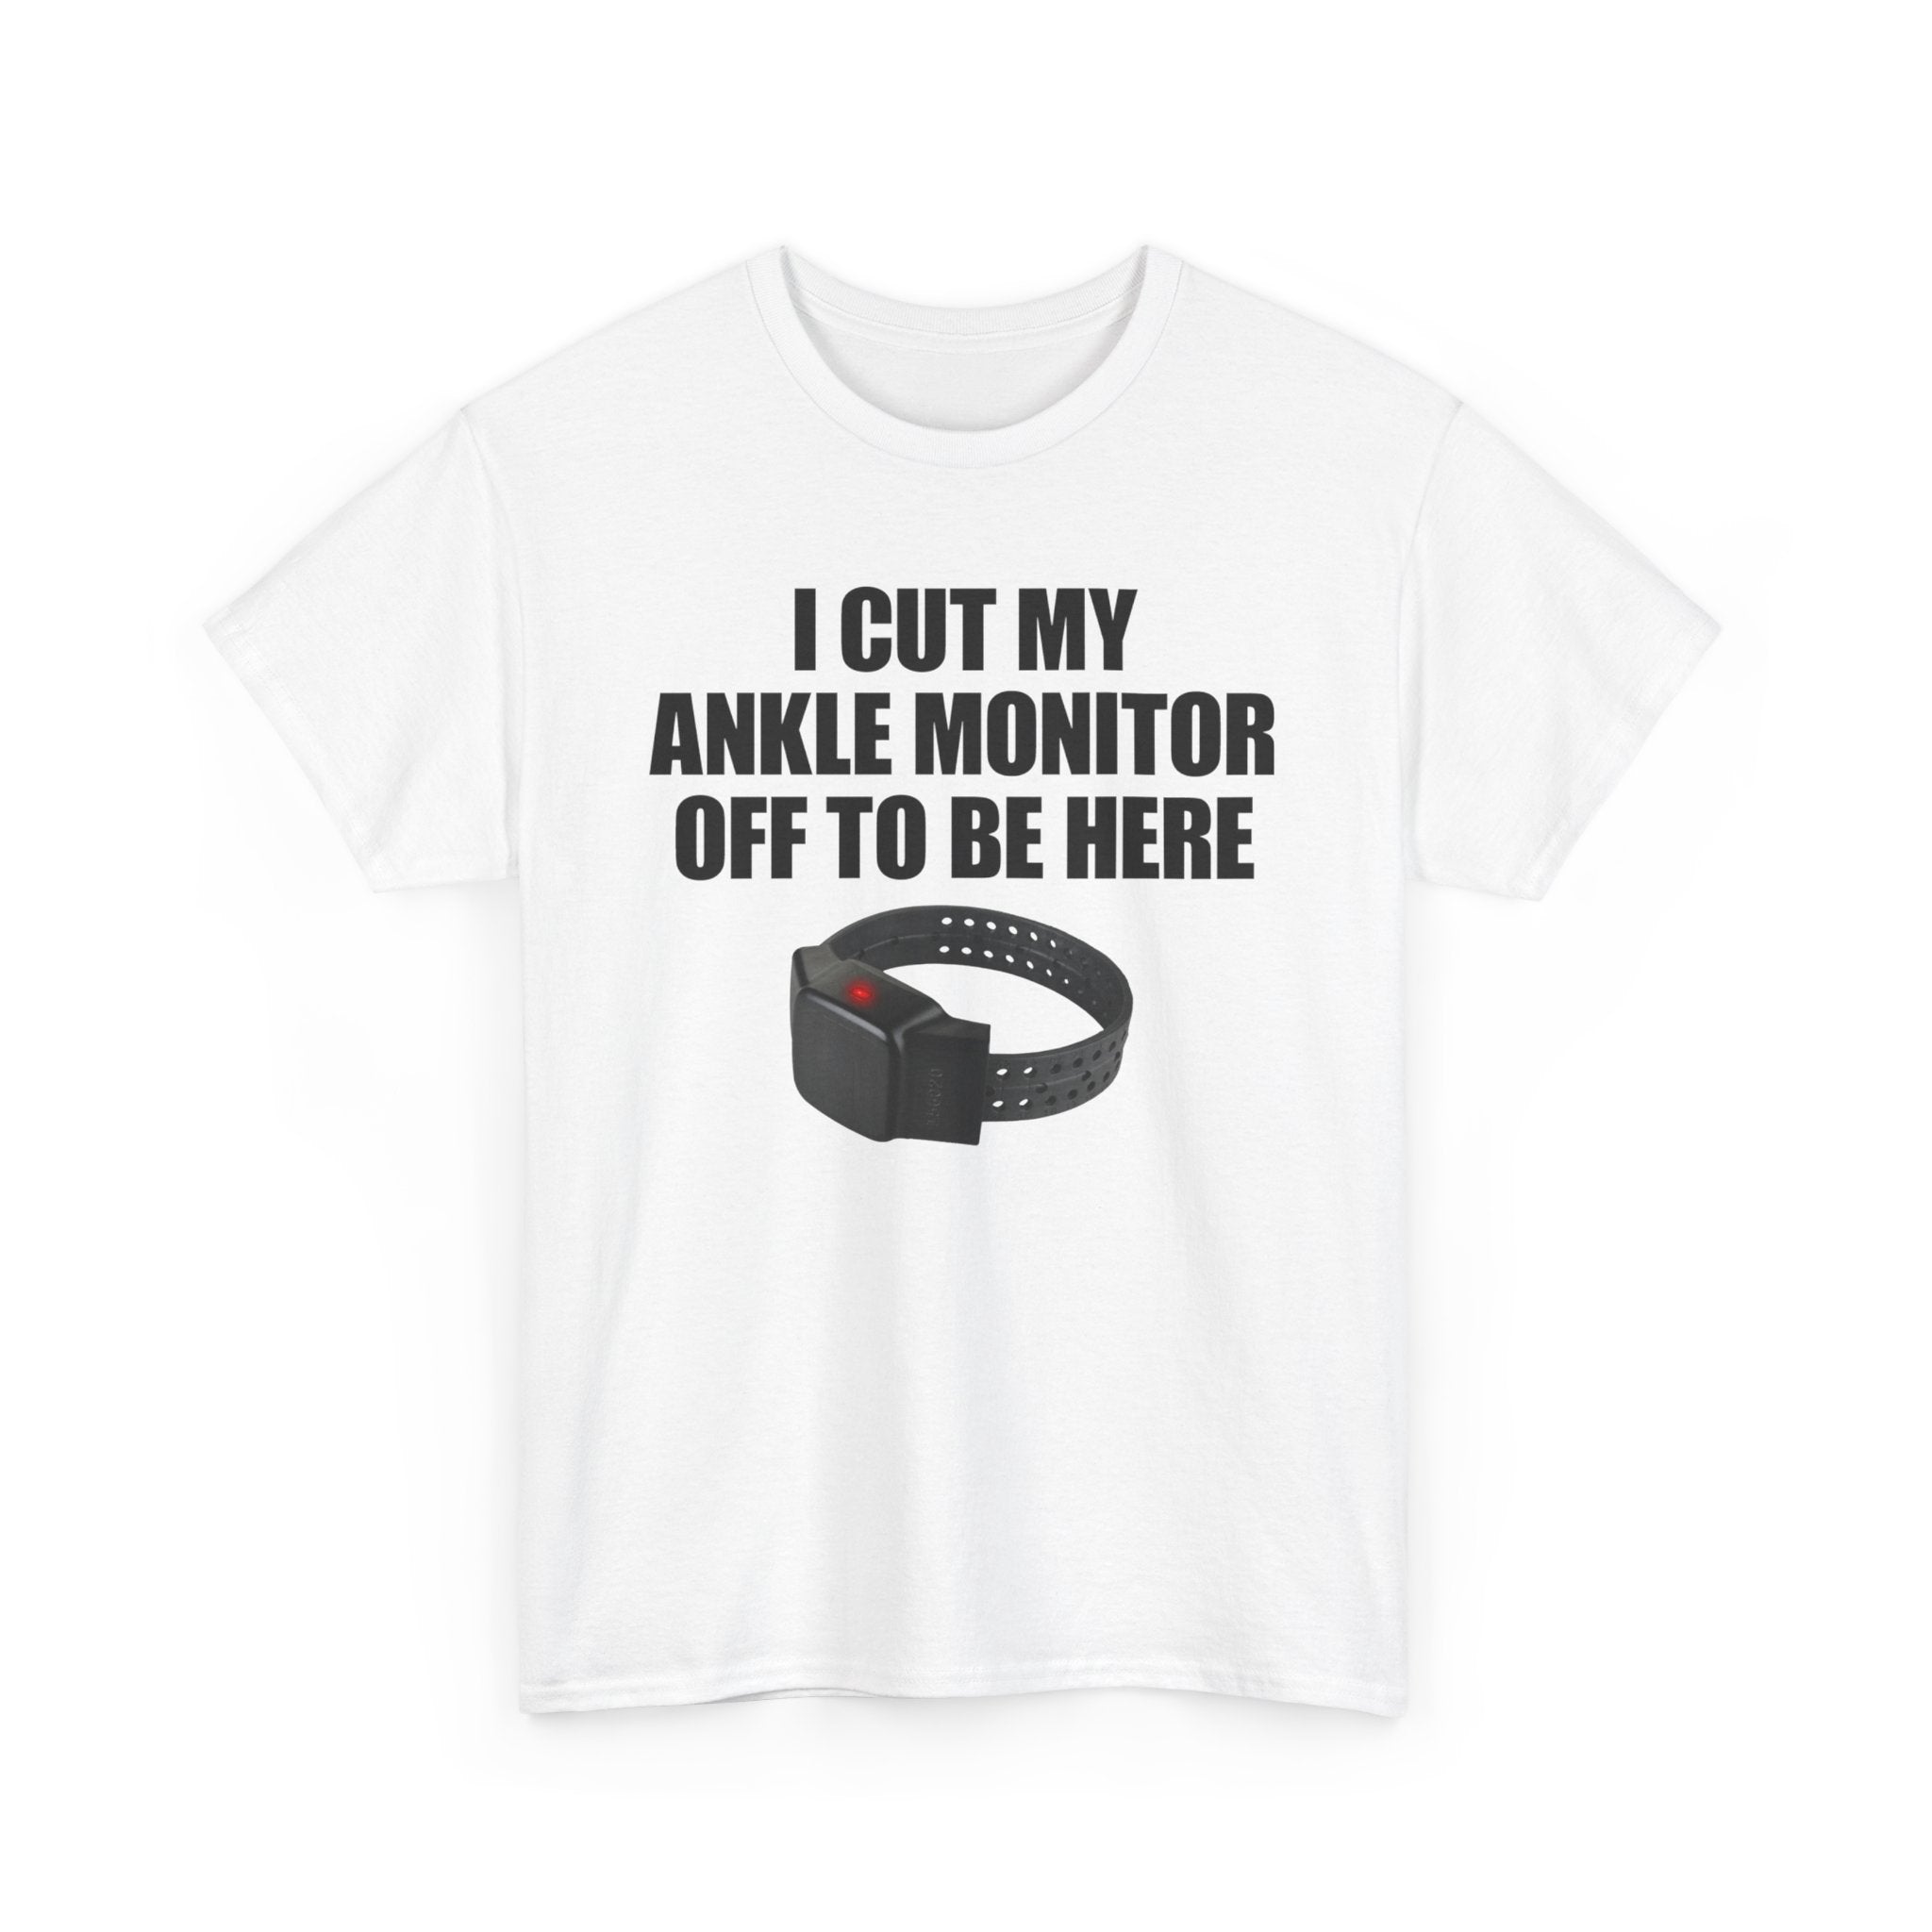 I CUT MY ANKLE MONITOR OFF TO BE HERE T-SHIRT